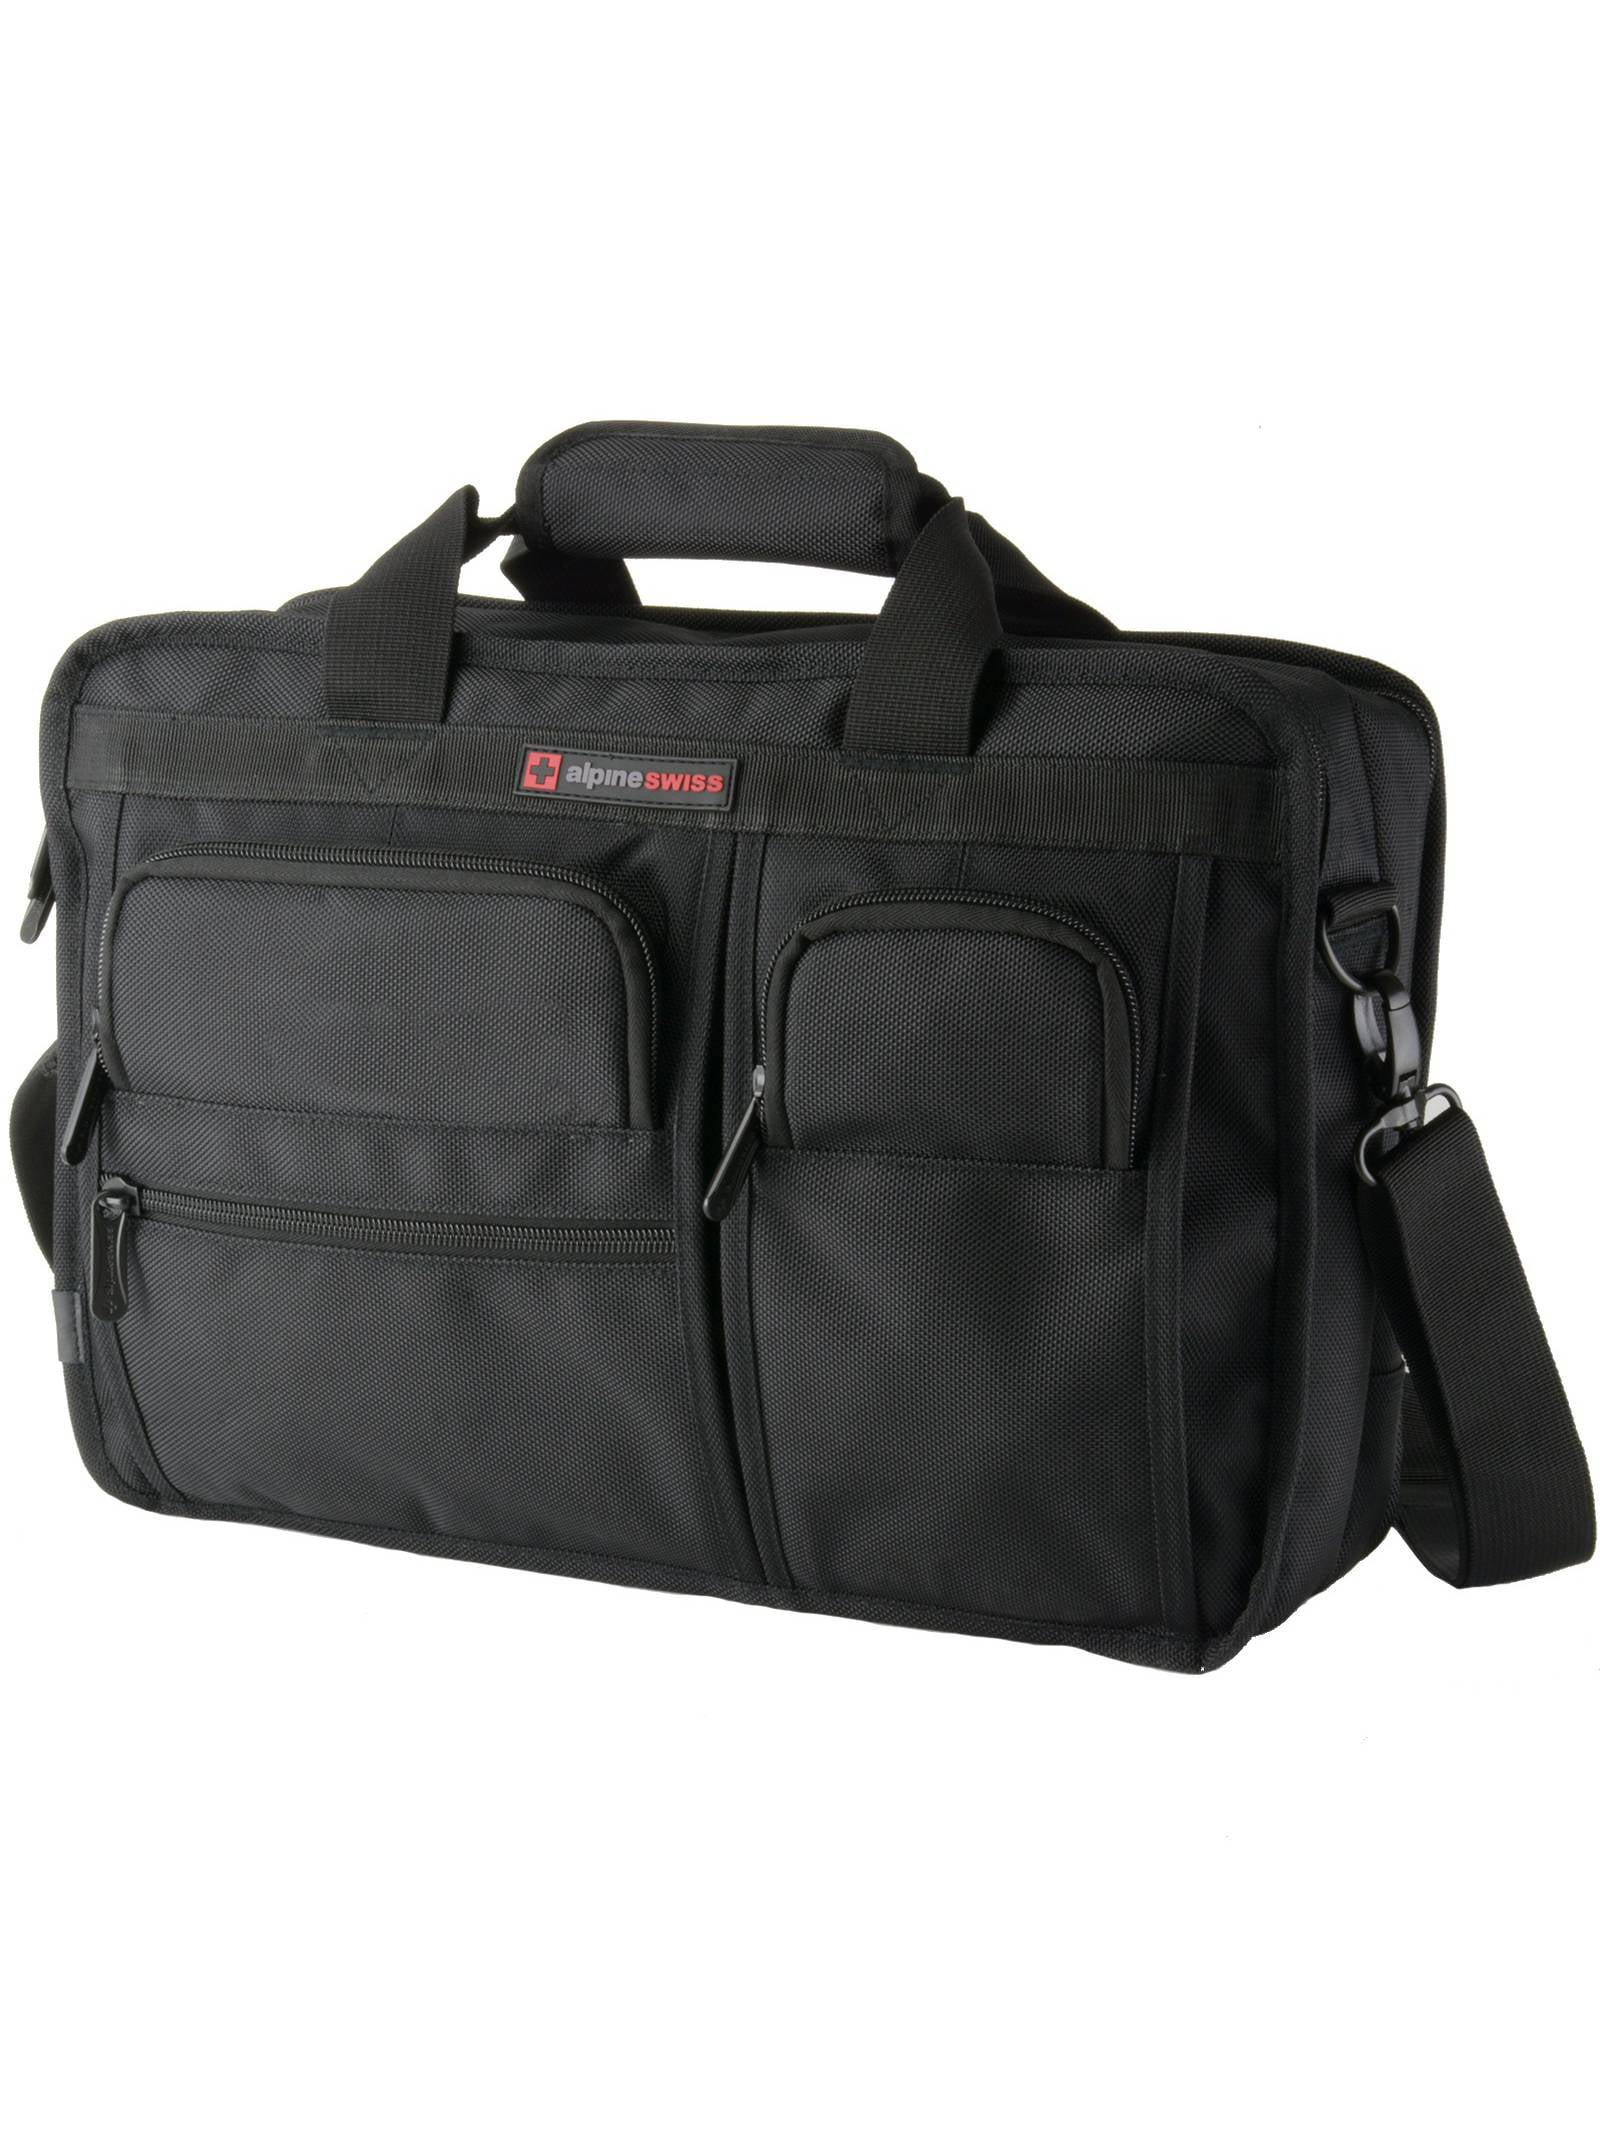 Alpine Swiss Conrad Messenger Bag 15.6 Inch Laptop Briefcase with Tablet Sleeve 